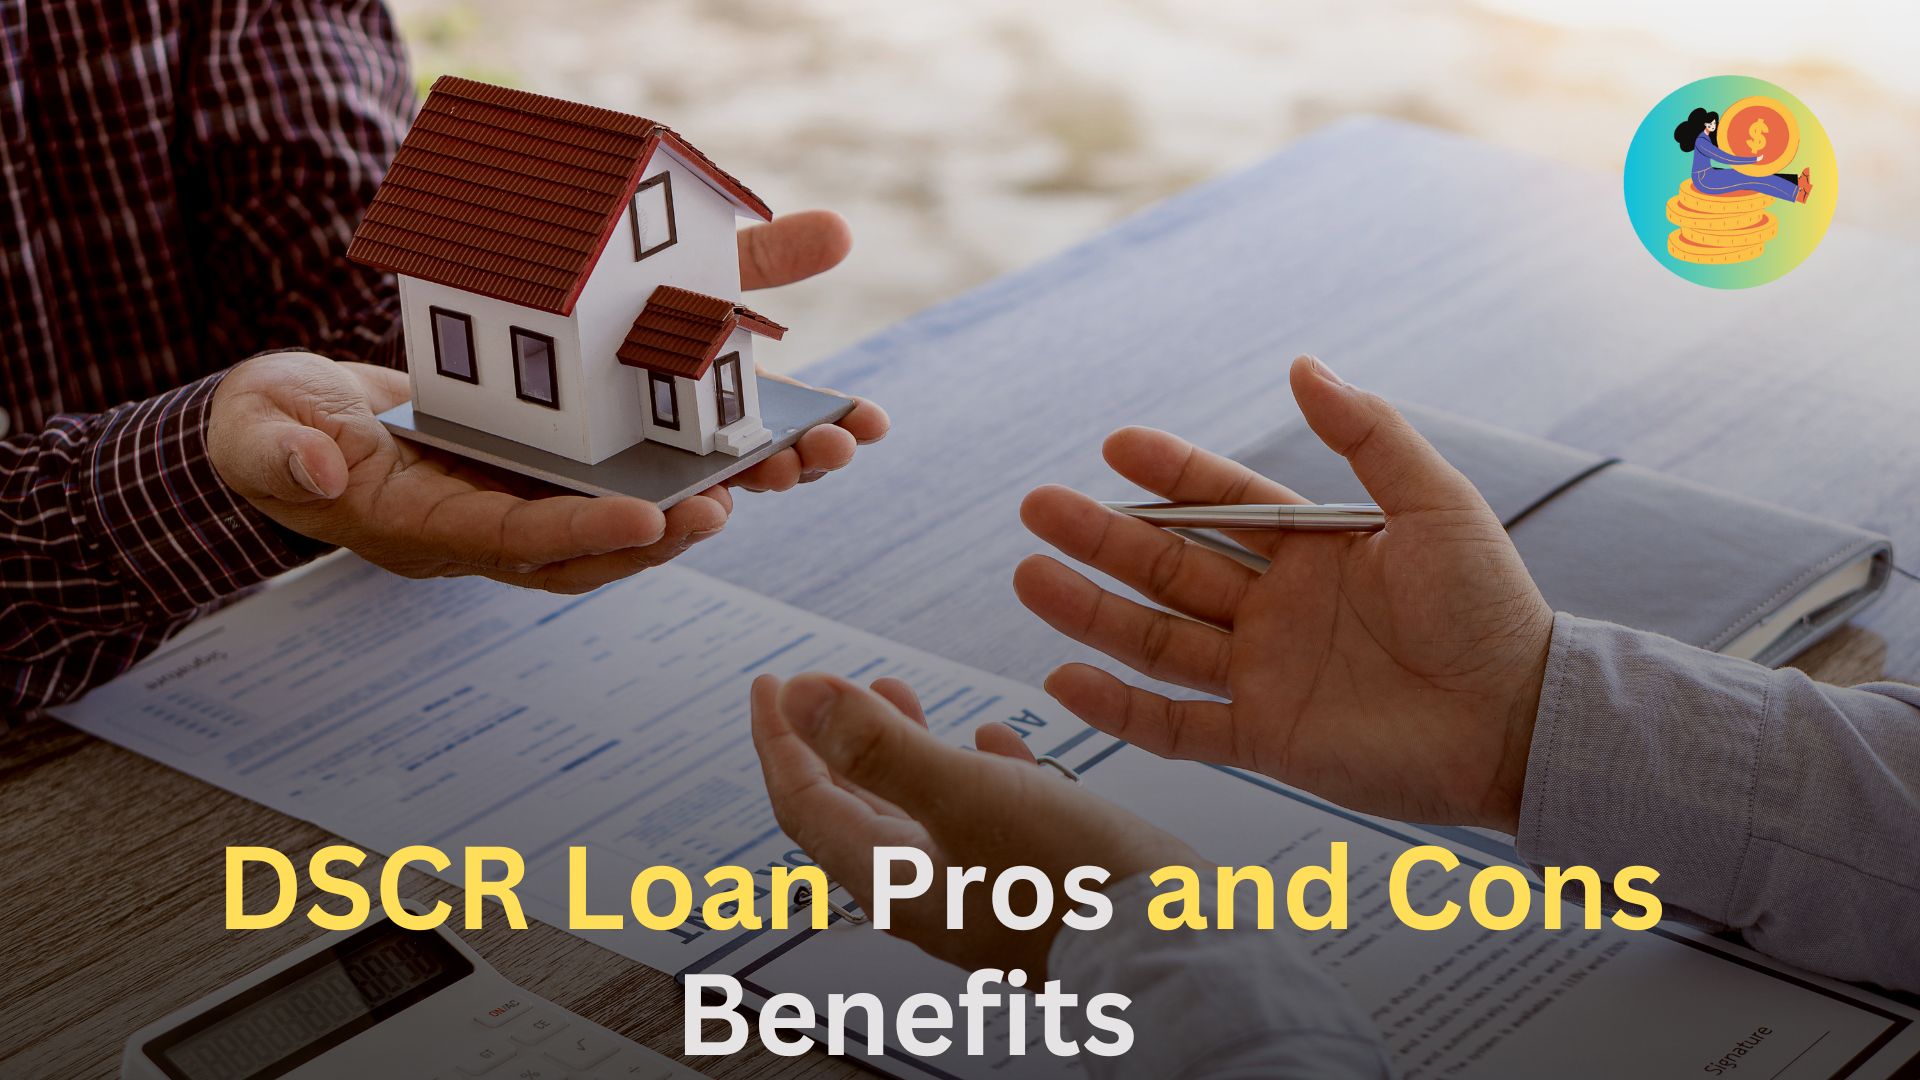 DSCR Loan Pros and Cons,Details, Guide (1)